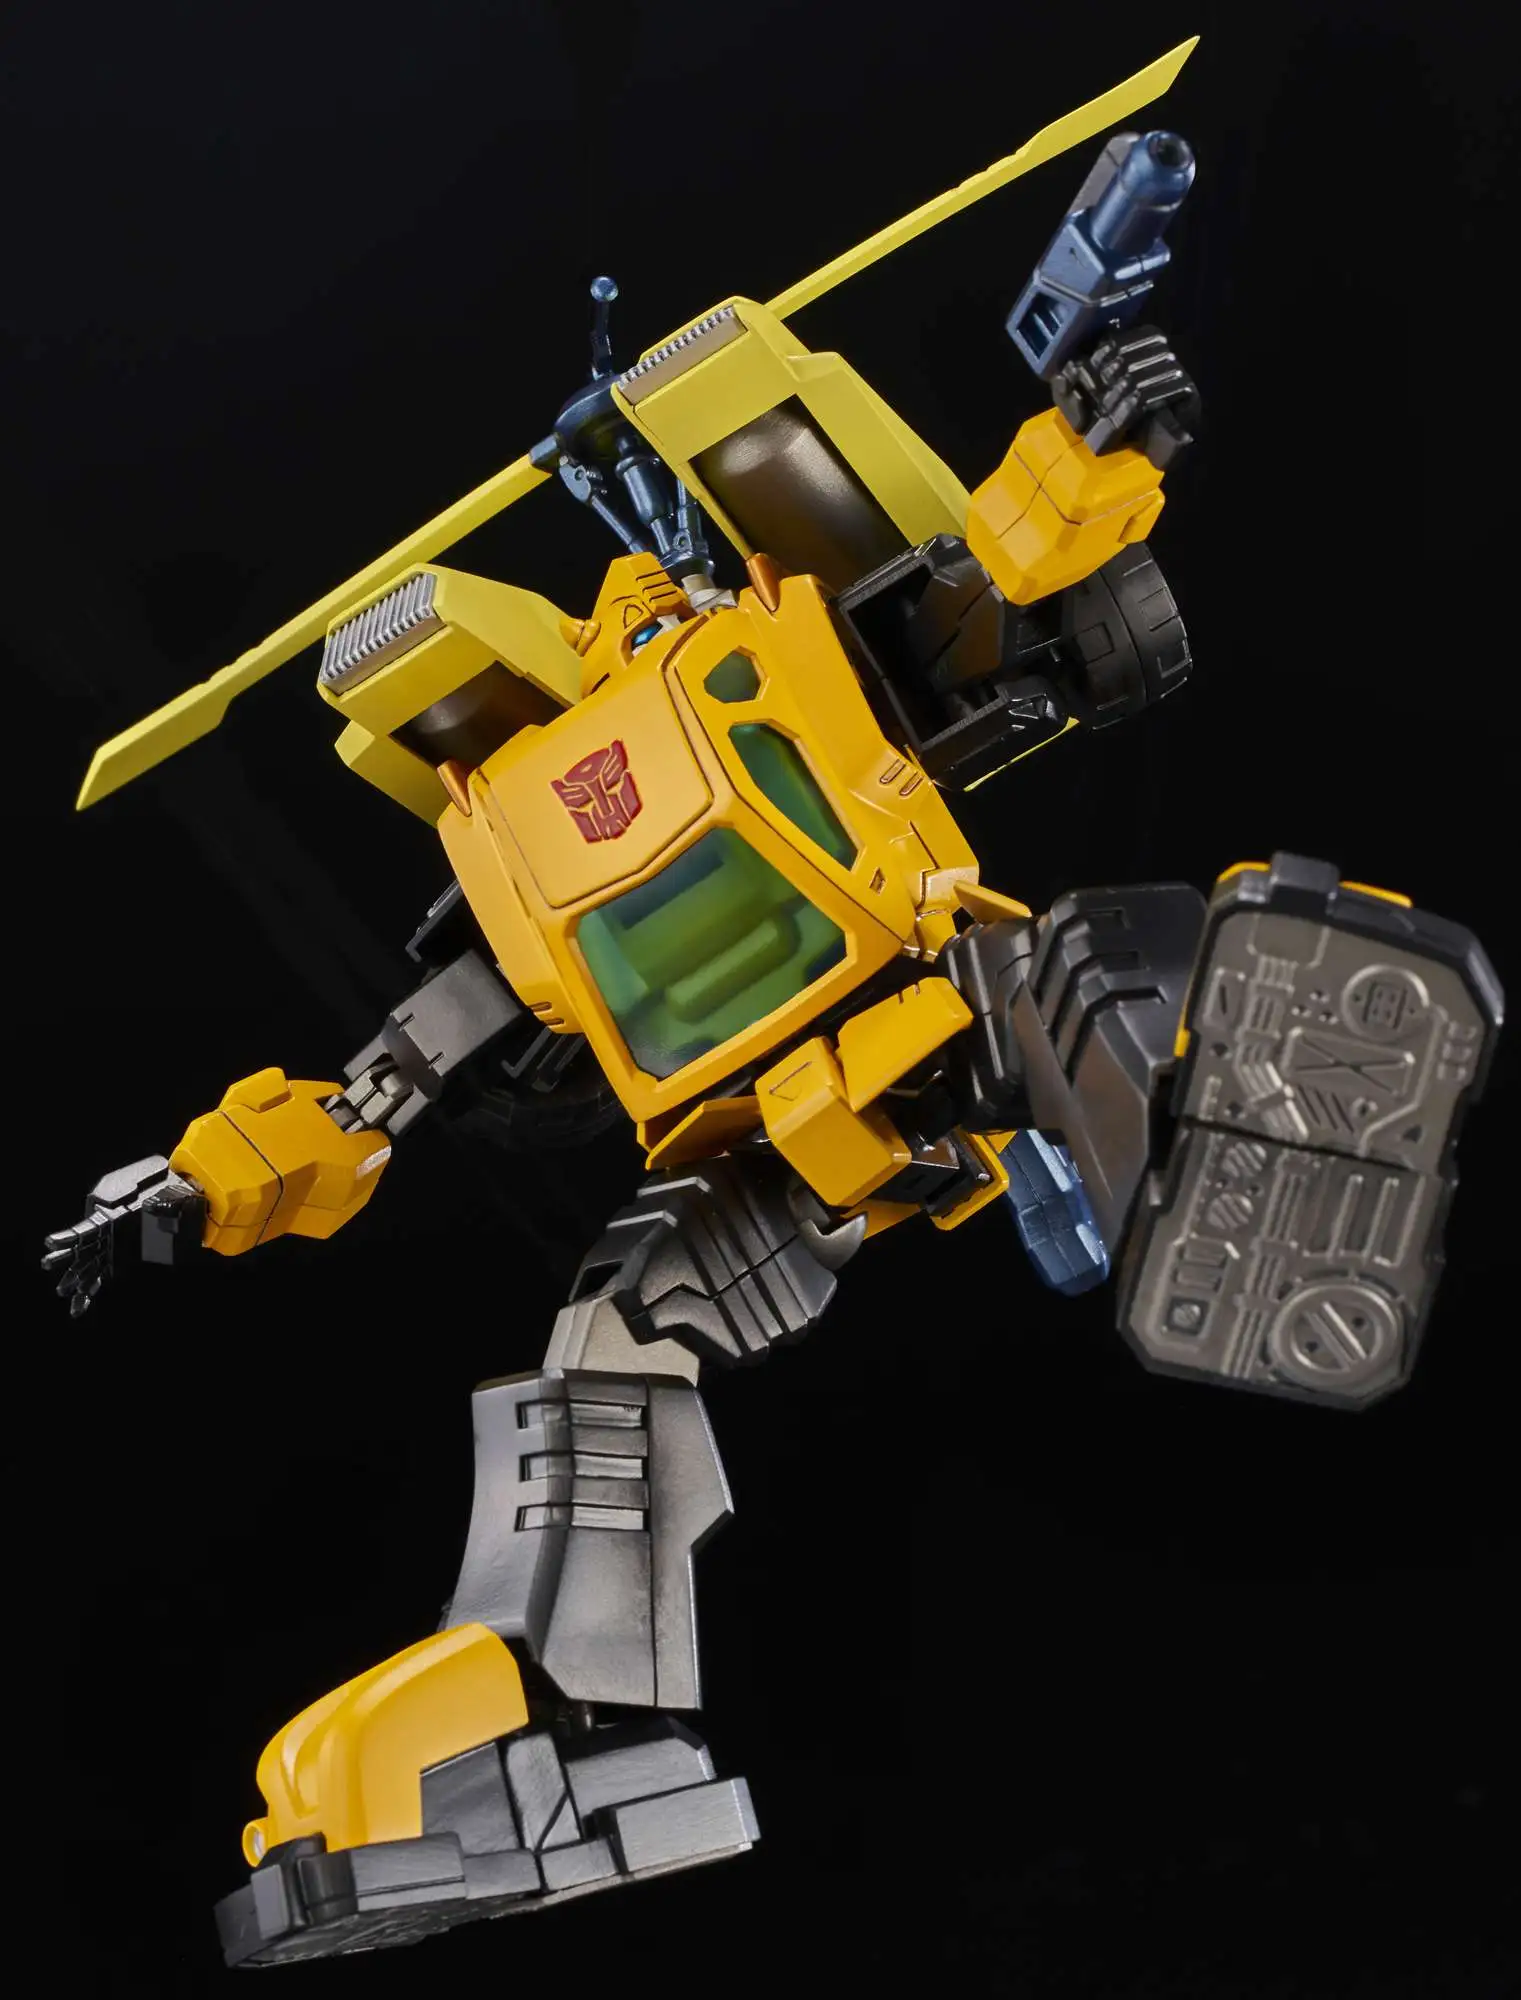 Flm51230 Flame Toys Transformers Furai 04 Bumblebee Model Kit for sale online 